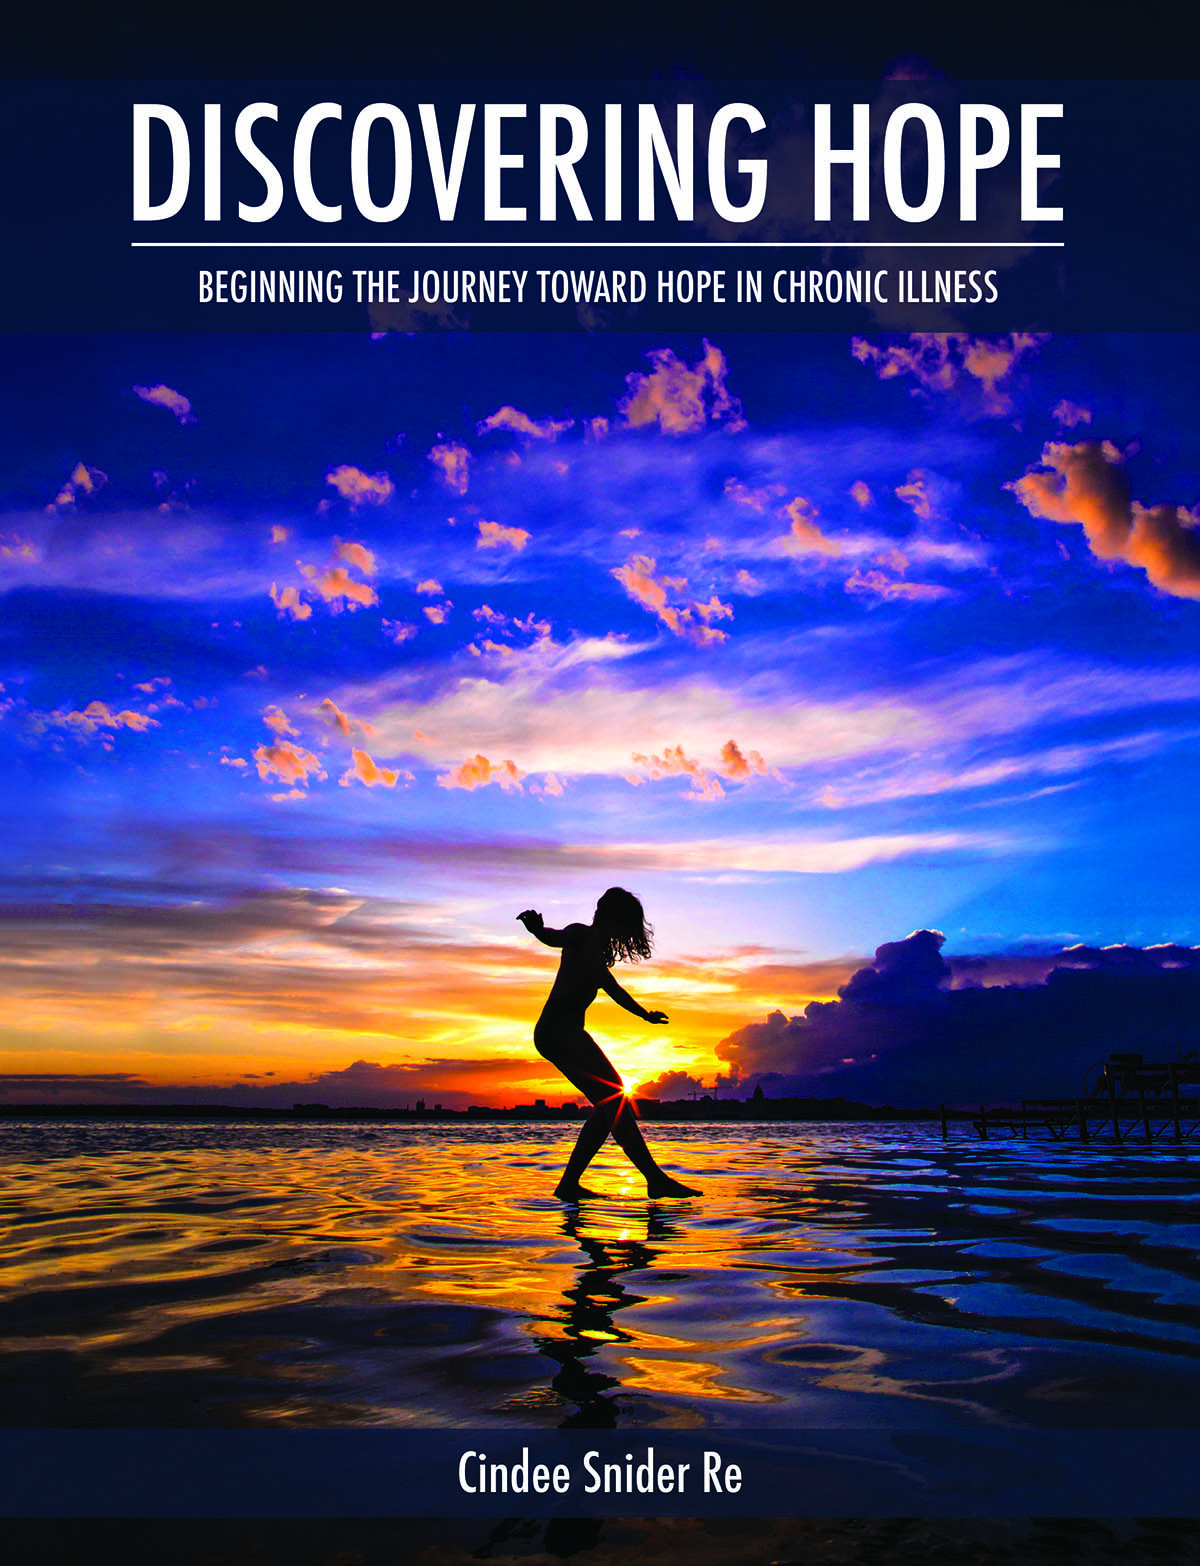 Discovering Hope